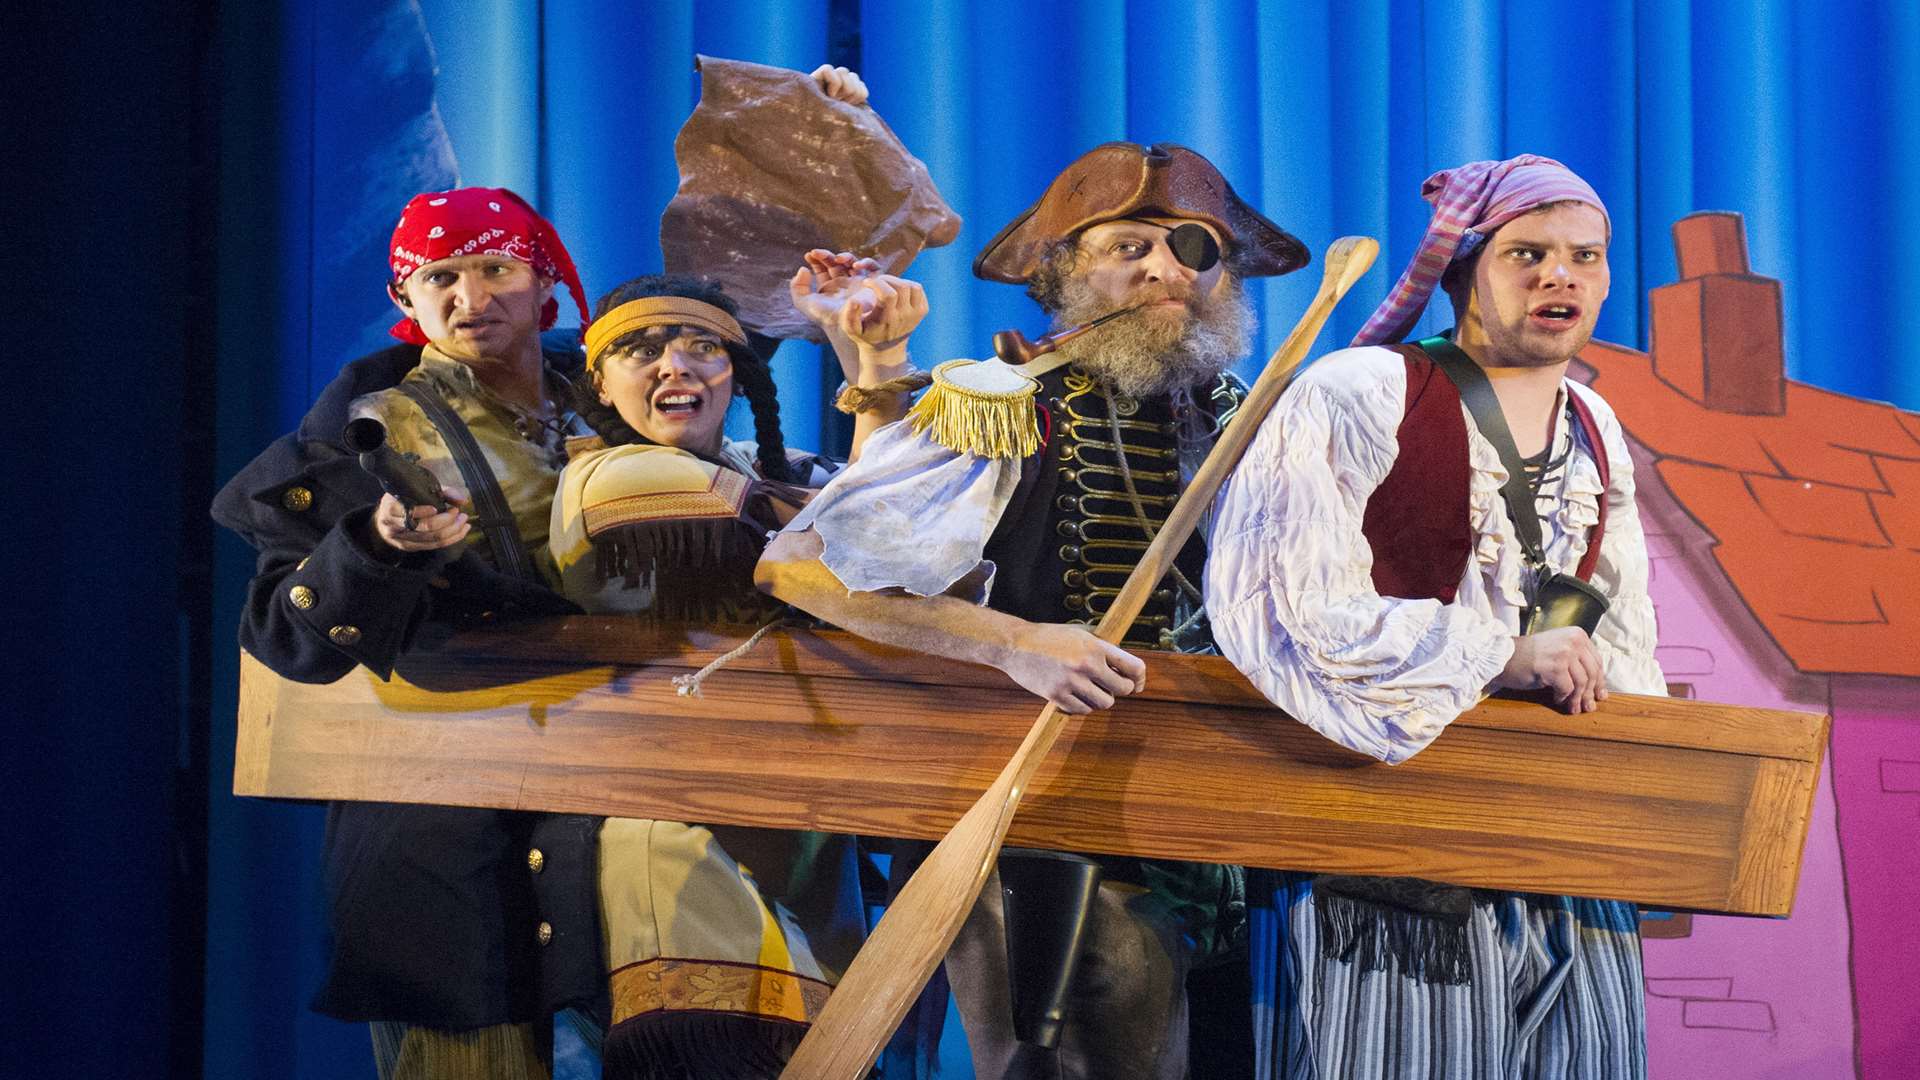 James Marlowe, Naomi Sheldon, Cornelius Booth and Harry Kershaw as the pirates in Peter Pan Goes Wrong